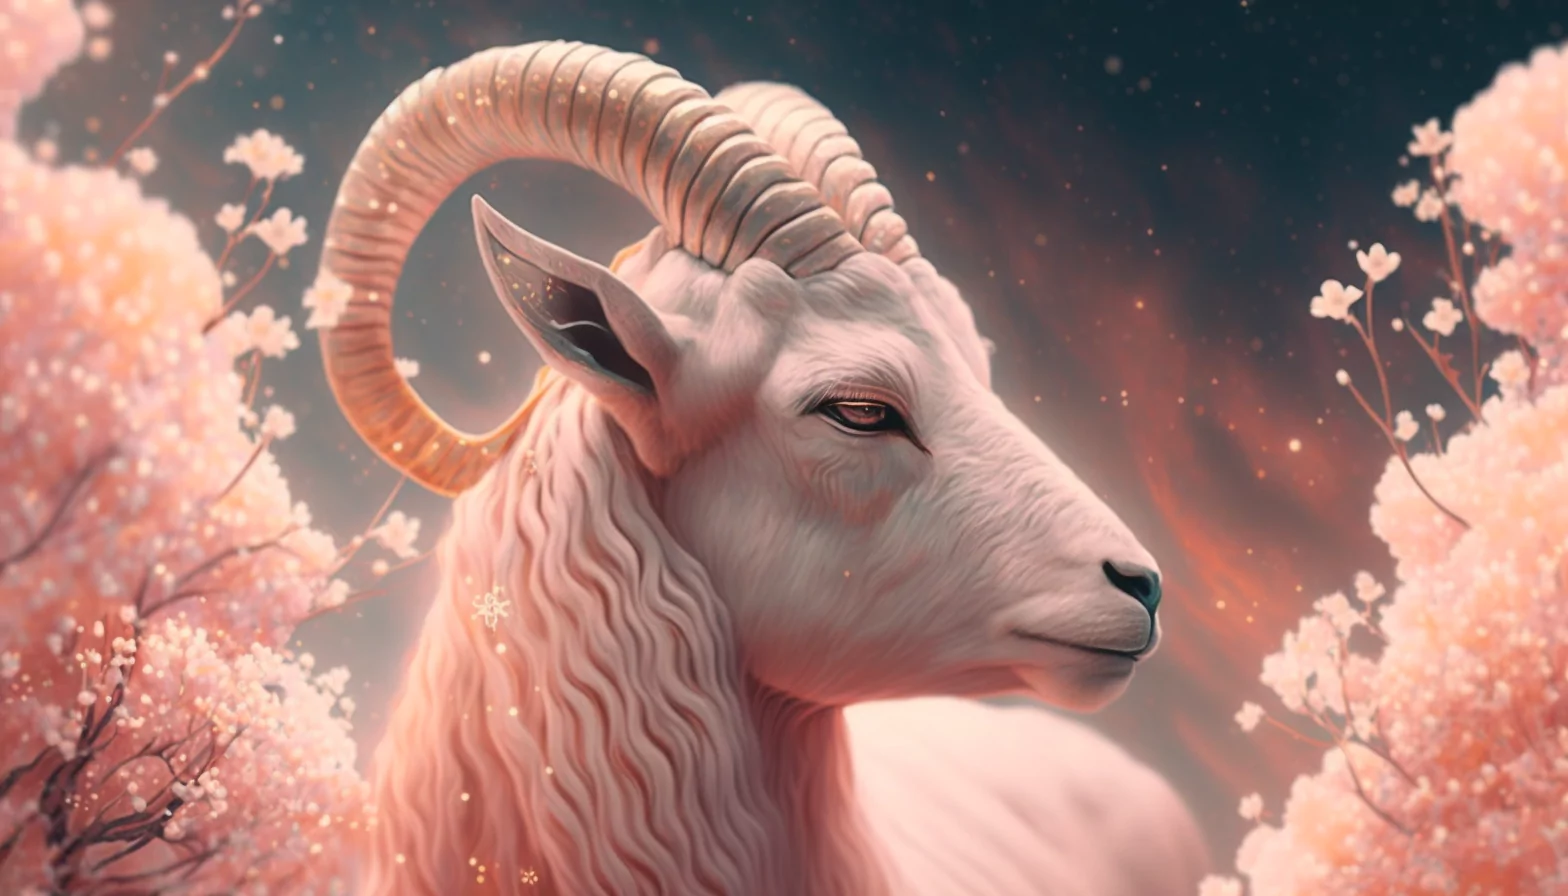 Aries Season: Ignite Your Inner Fire and Take Charge